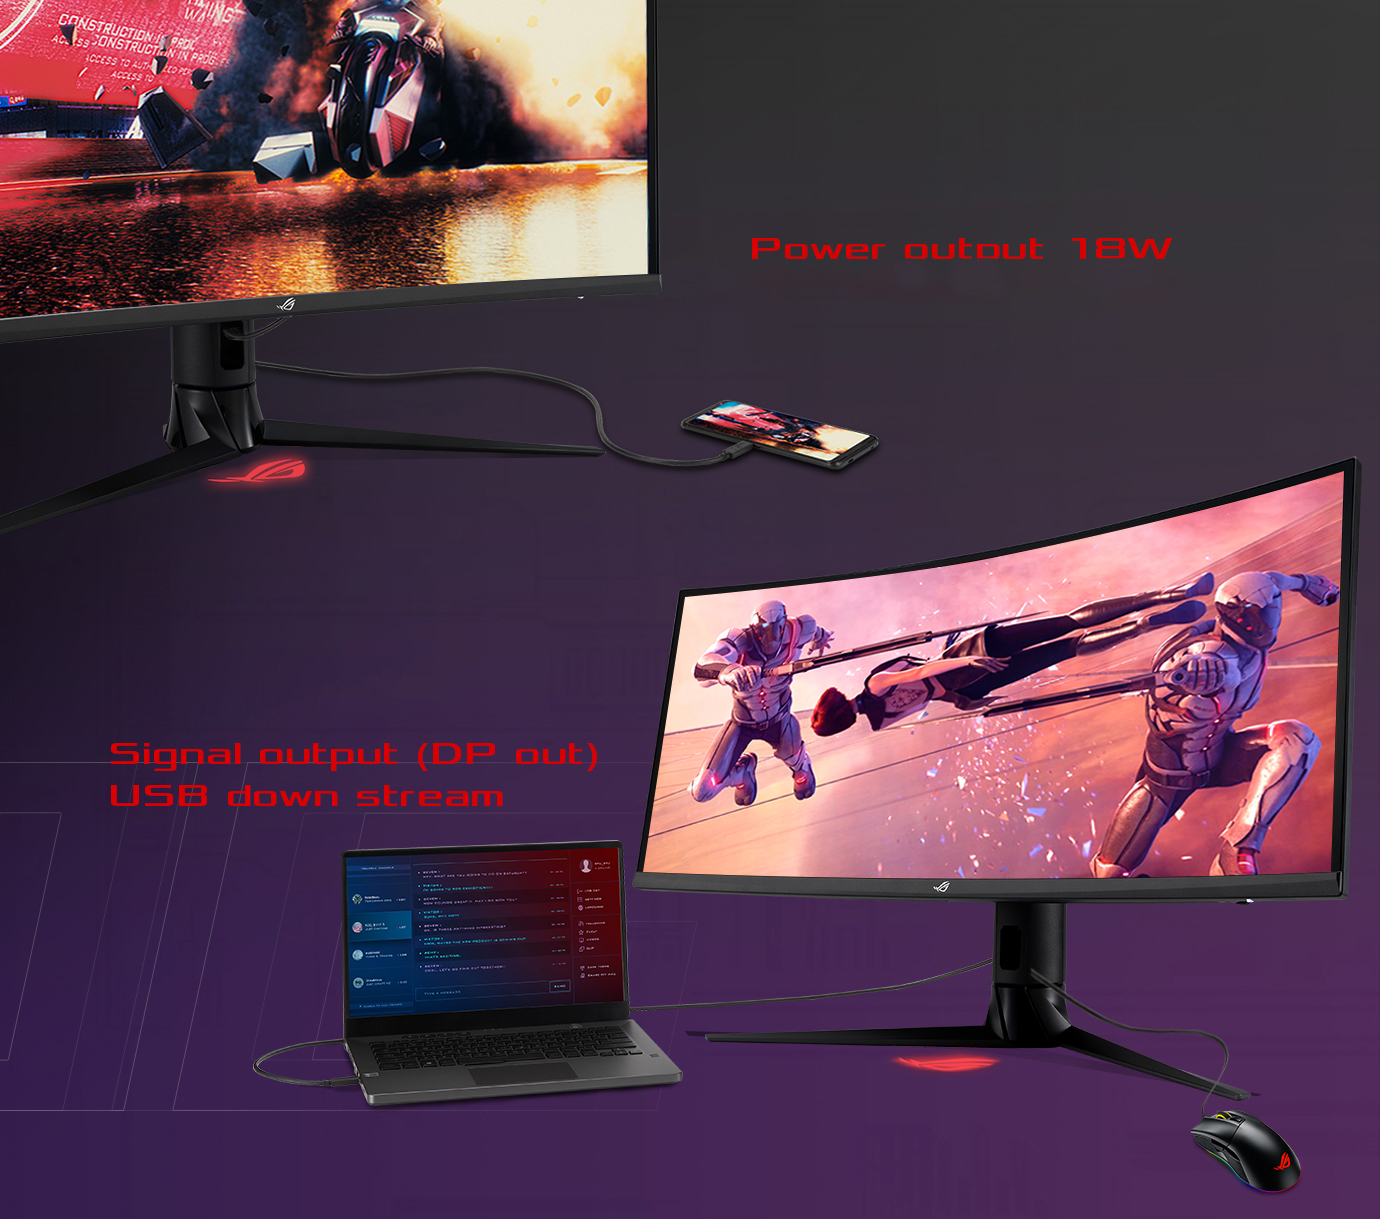 ROG Strix XG349C shown charging a mobile phone through the USB-C port on the monitor and The mouse can control laptop by connecting ROG Strix XG349C